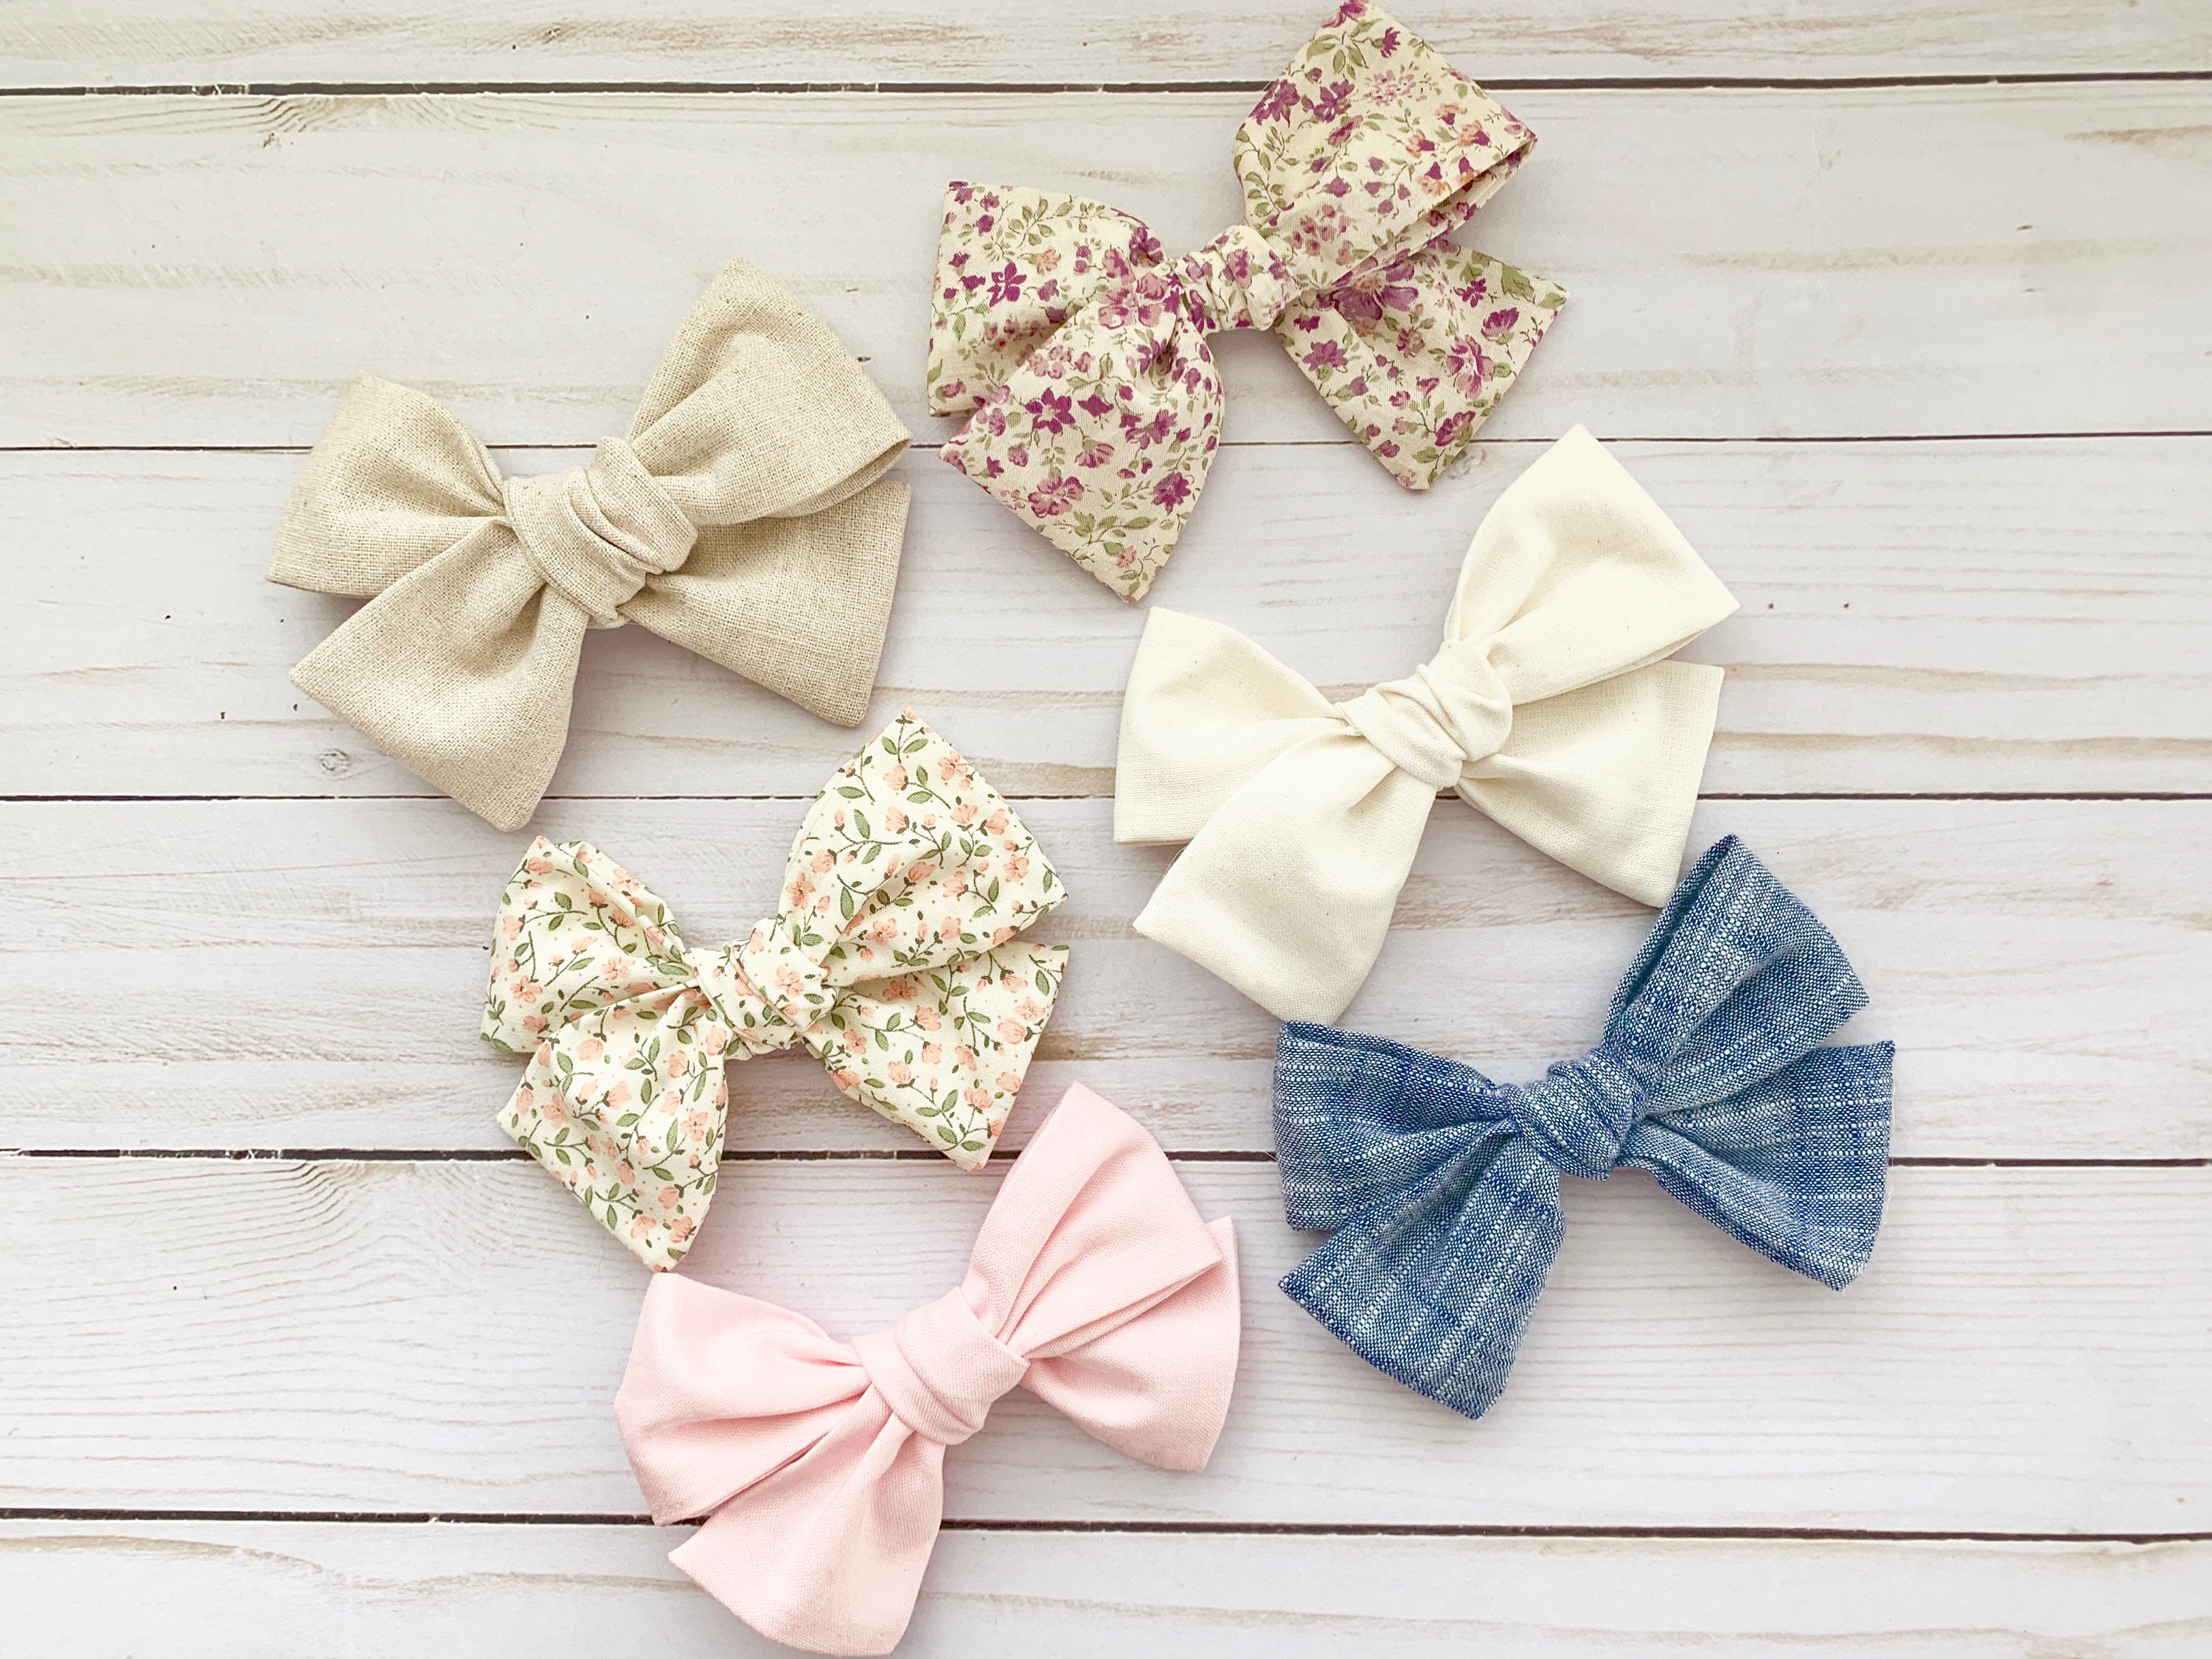 Hand-tied Fabric Bow Collection Pick Your Own Bow Set Hair | Etsy